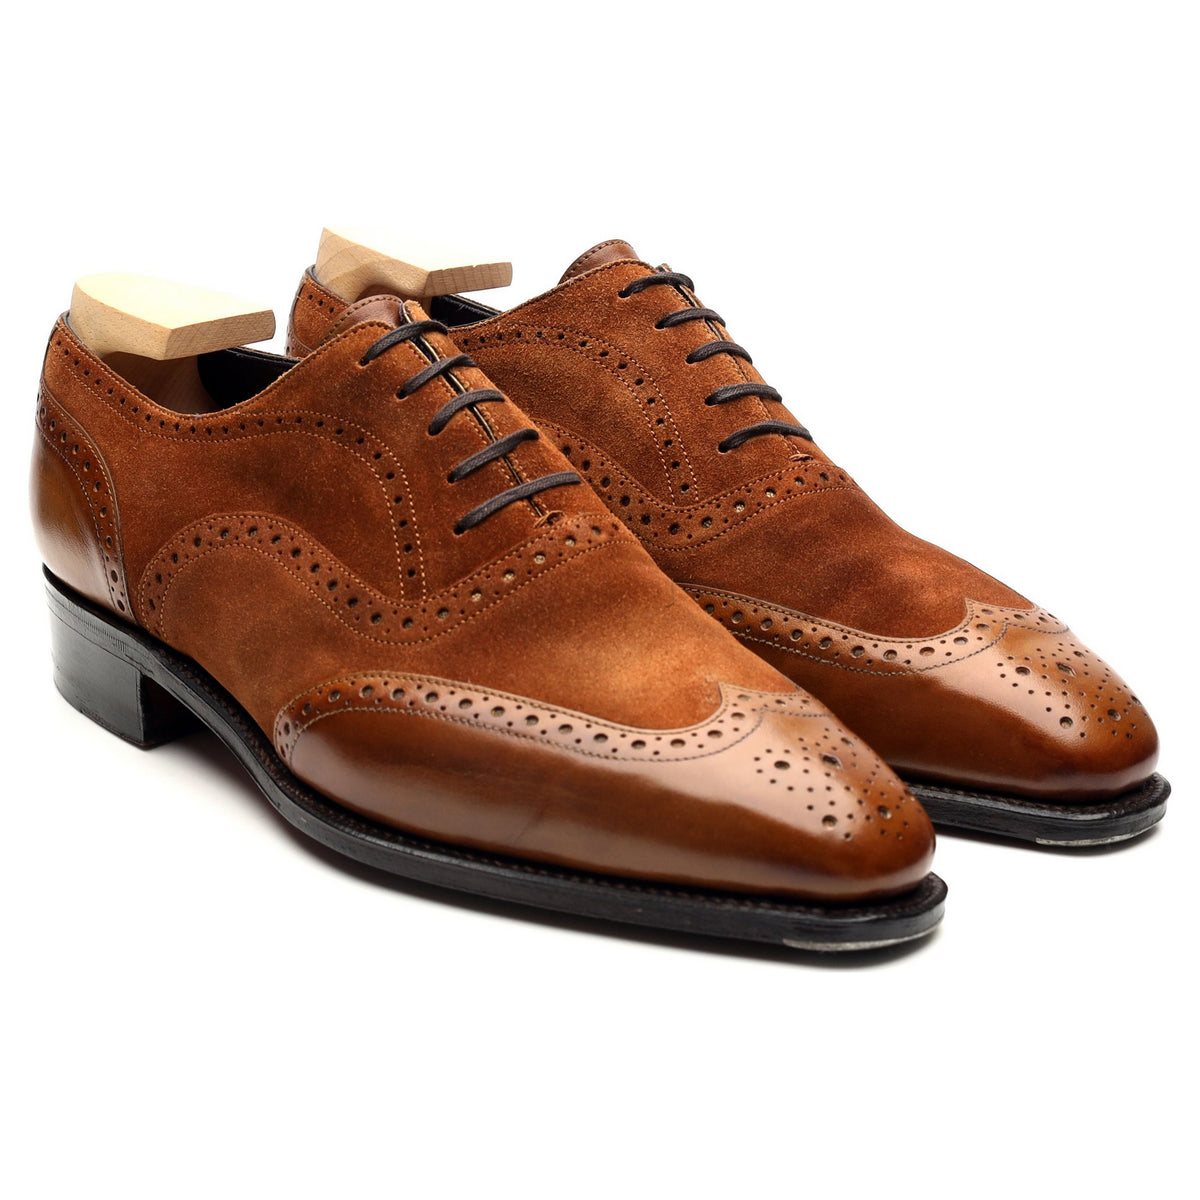 &#39;Vendome&#39; Brown Leather Suede Oxford Brogues UK 6.5 E